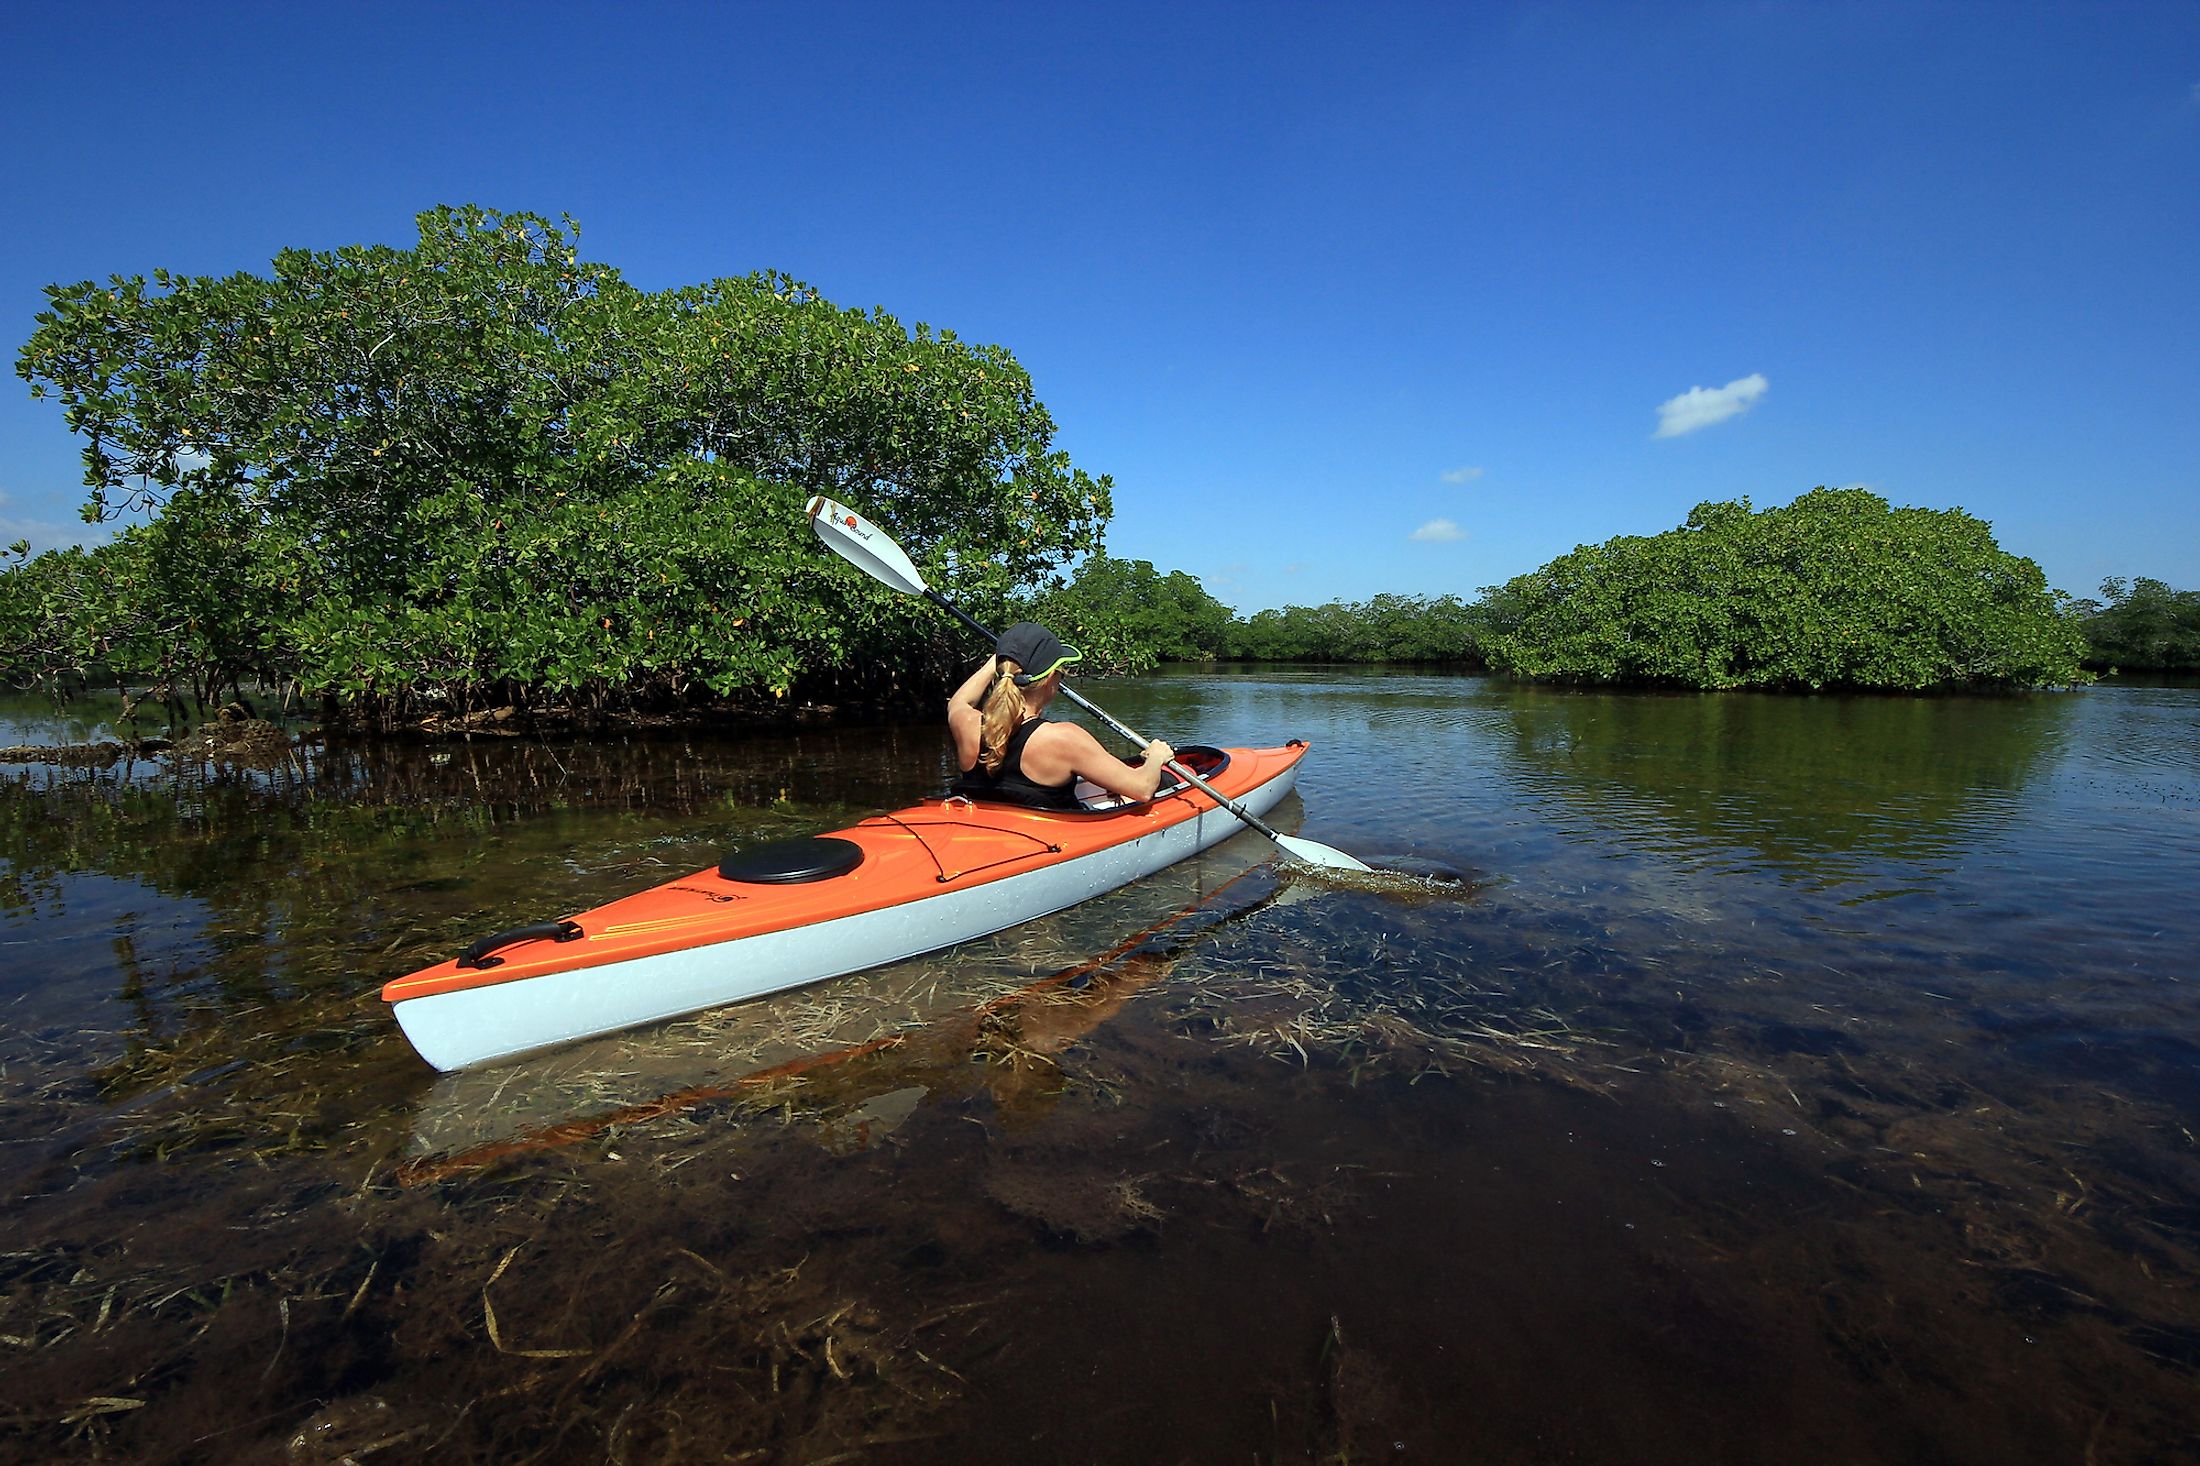 A kayaker in the Biscayne National Park. Editorial credit: Francisco Blanco / Shutterstock.com